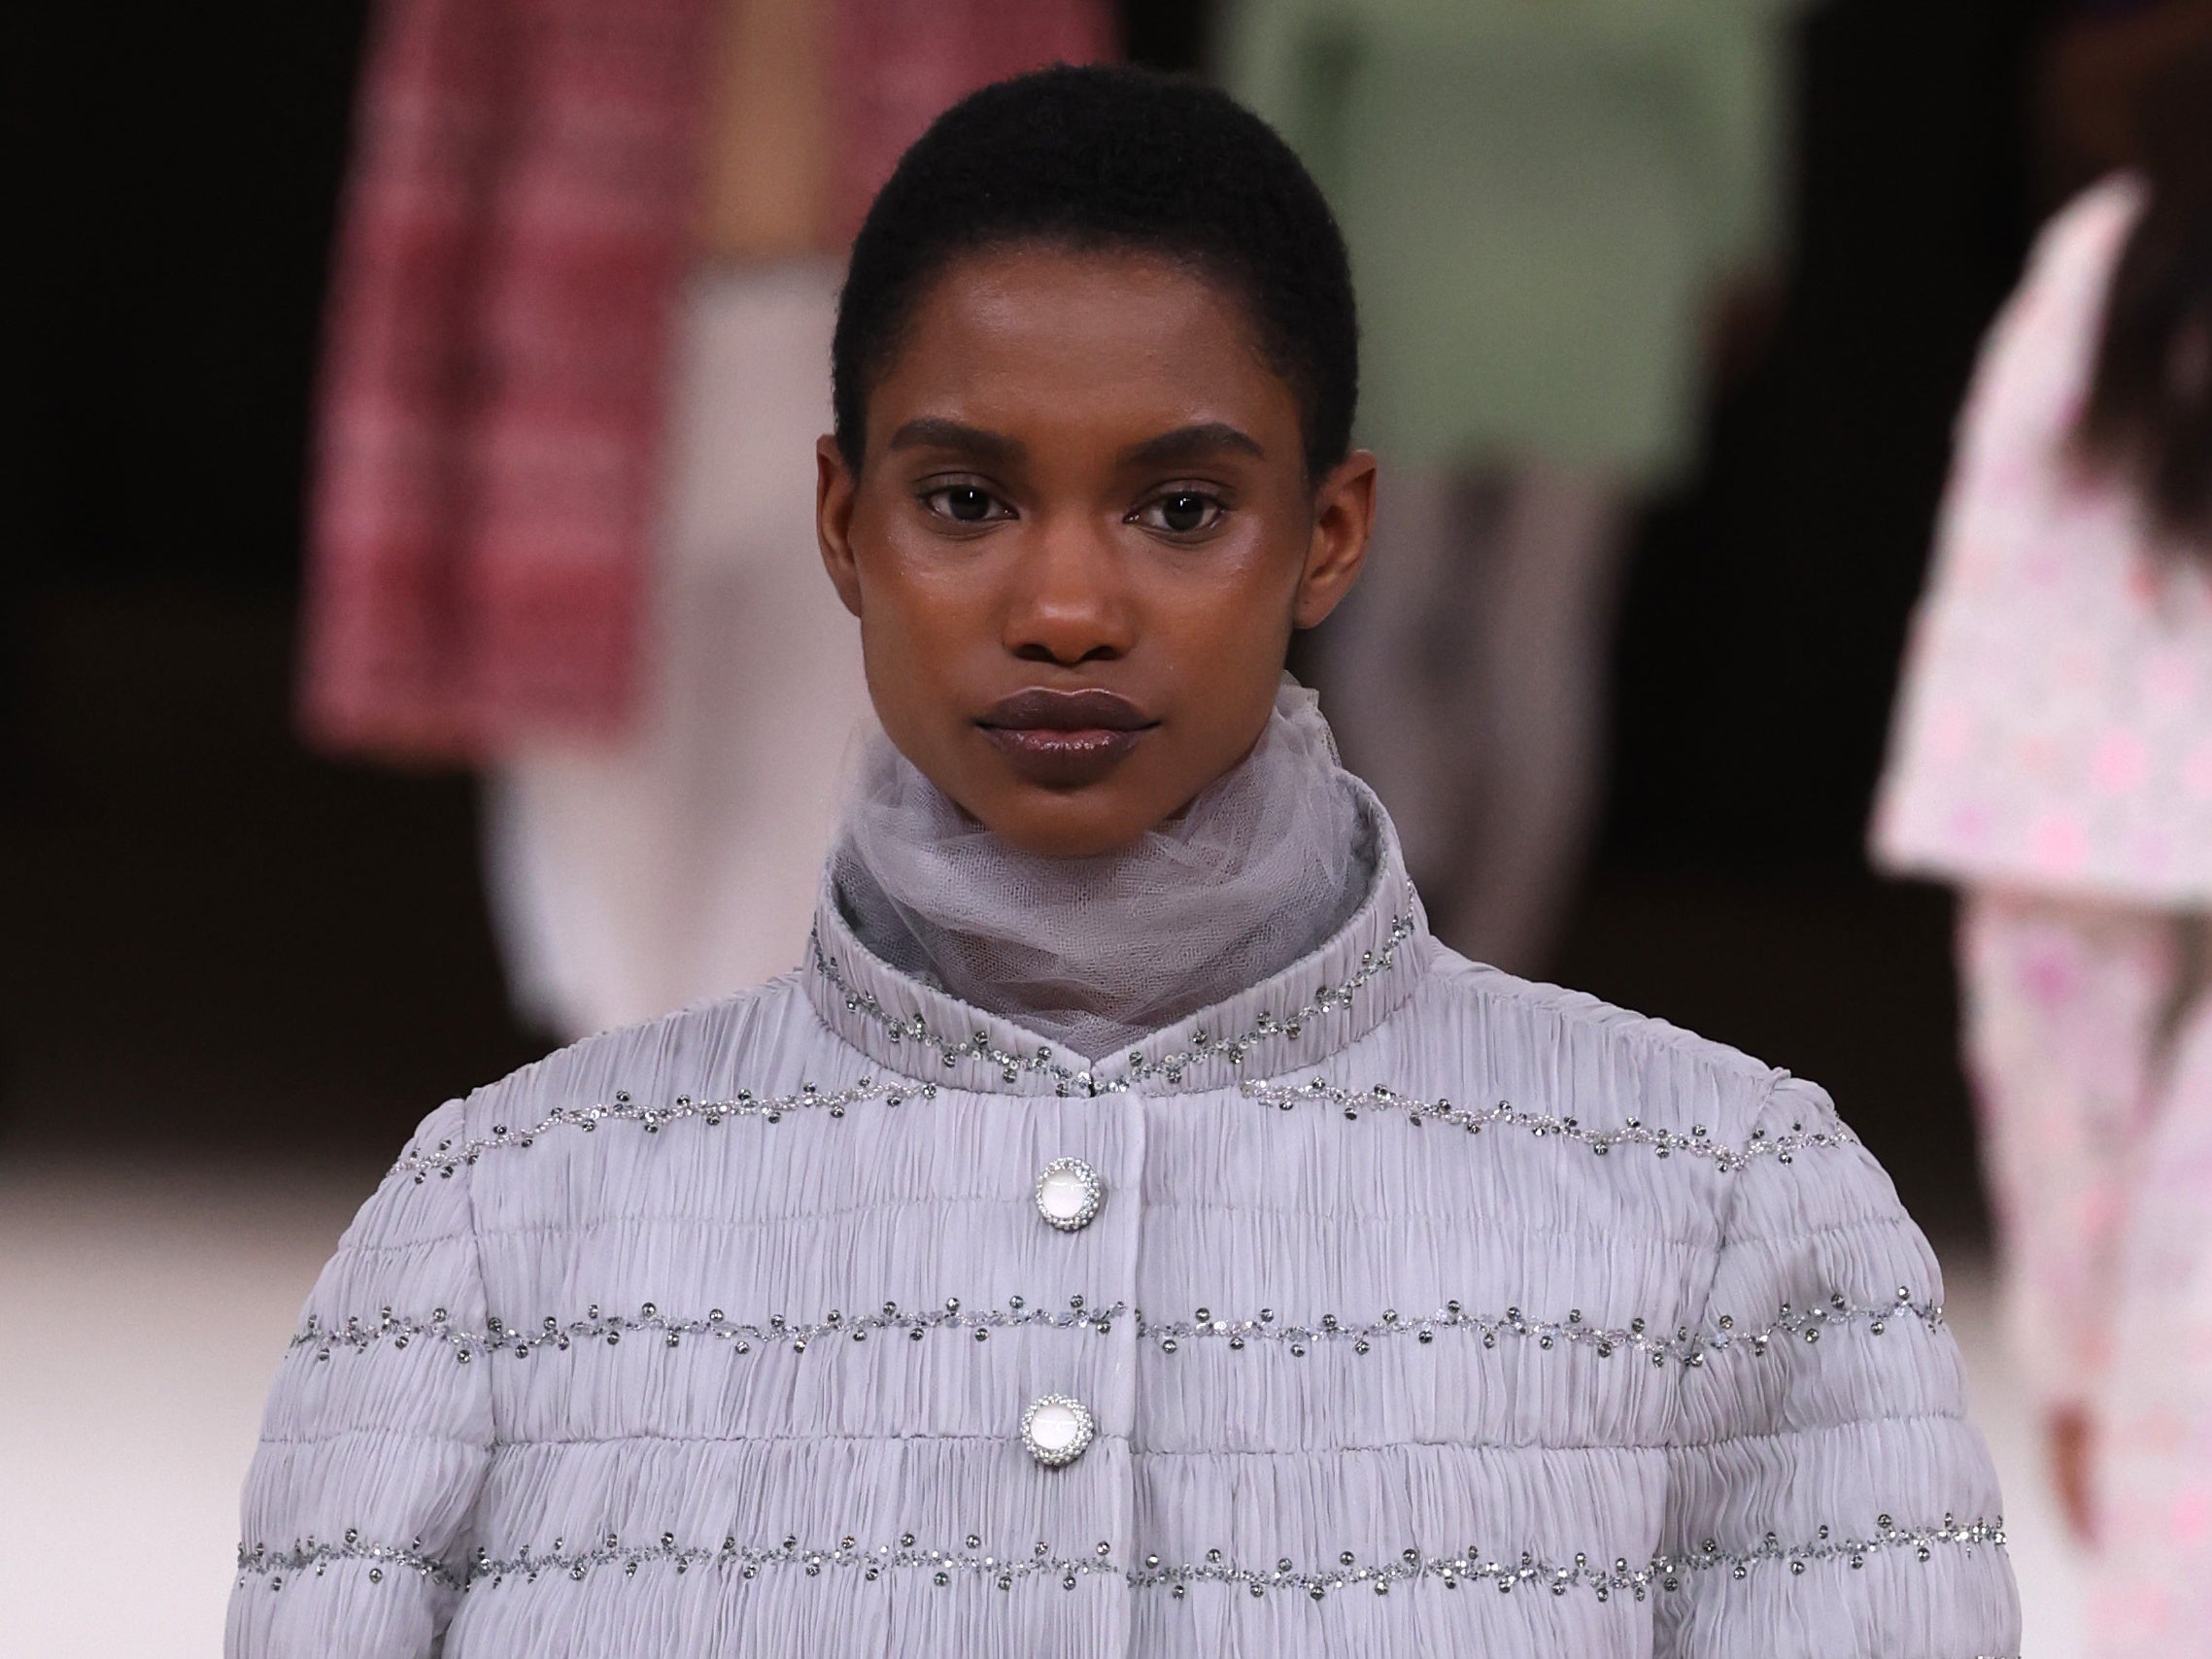 Chanel's Couture Show Celebrated The Beauty In Imperfection